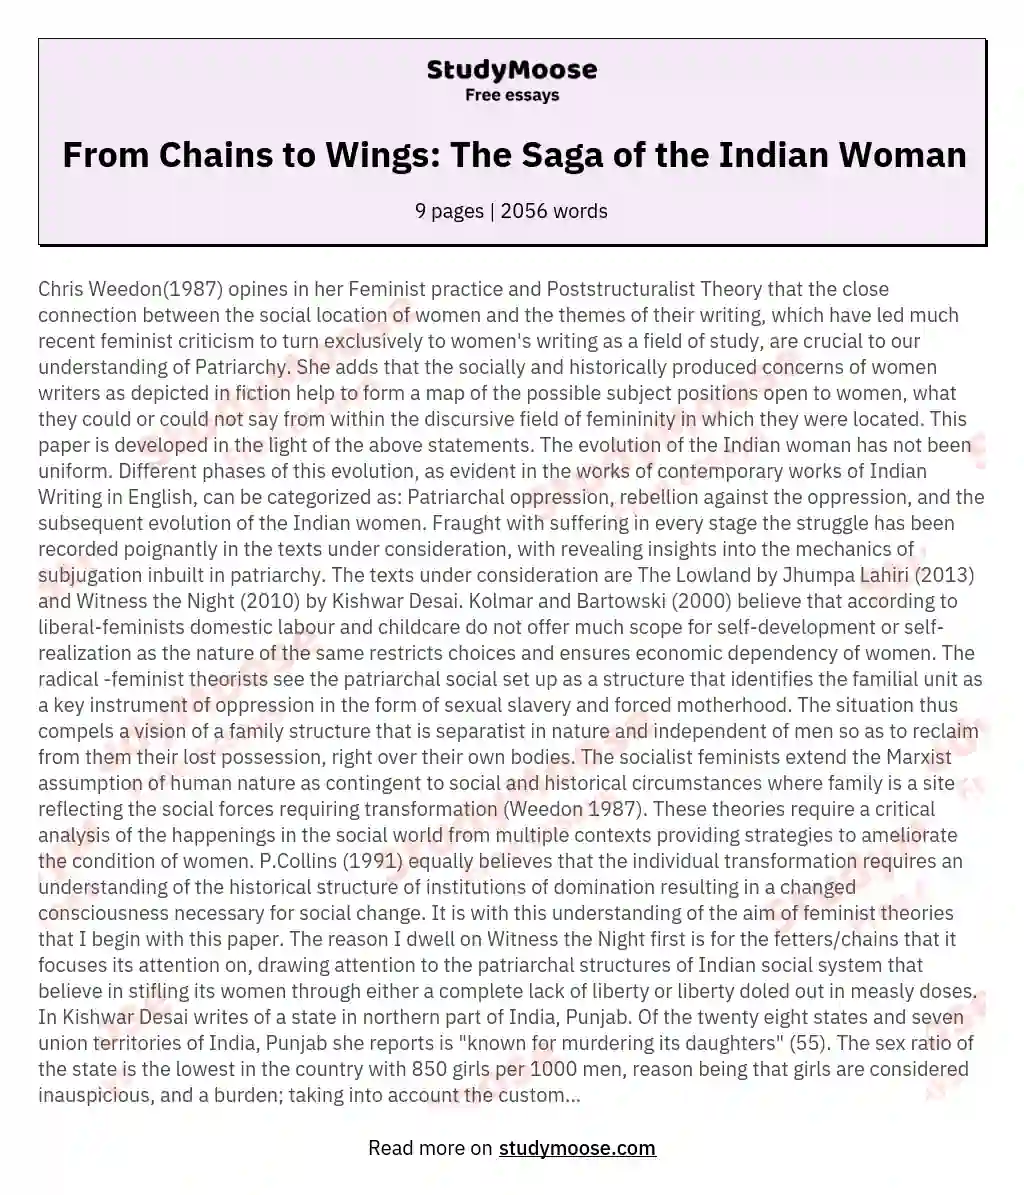 From Chains to Wings: The Saga of the Indian Woman essay